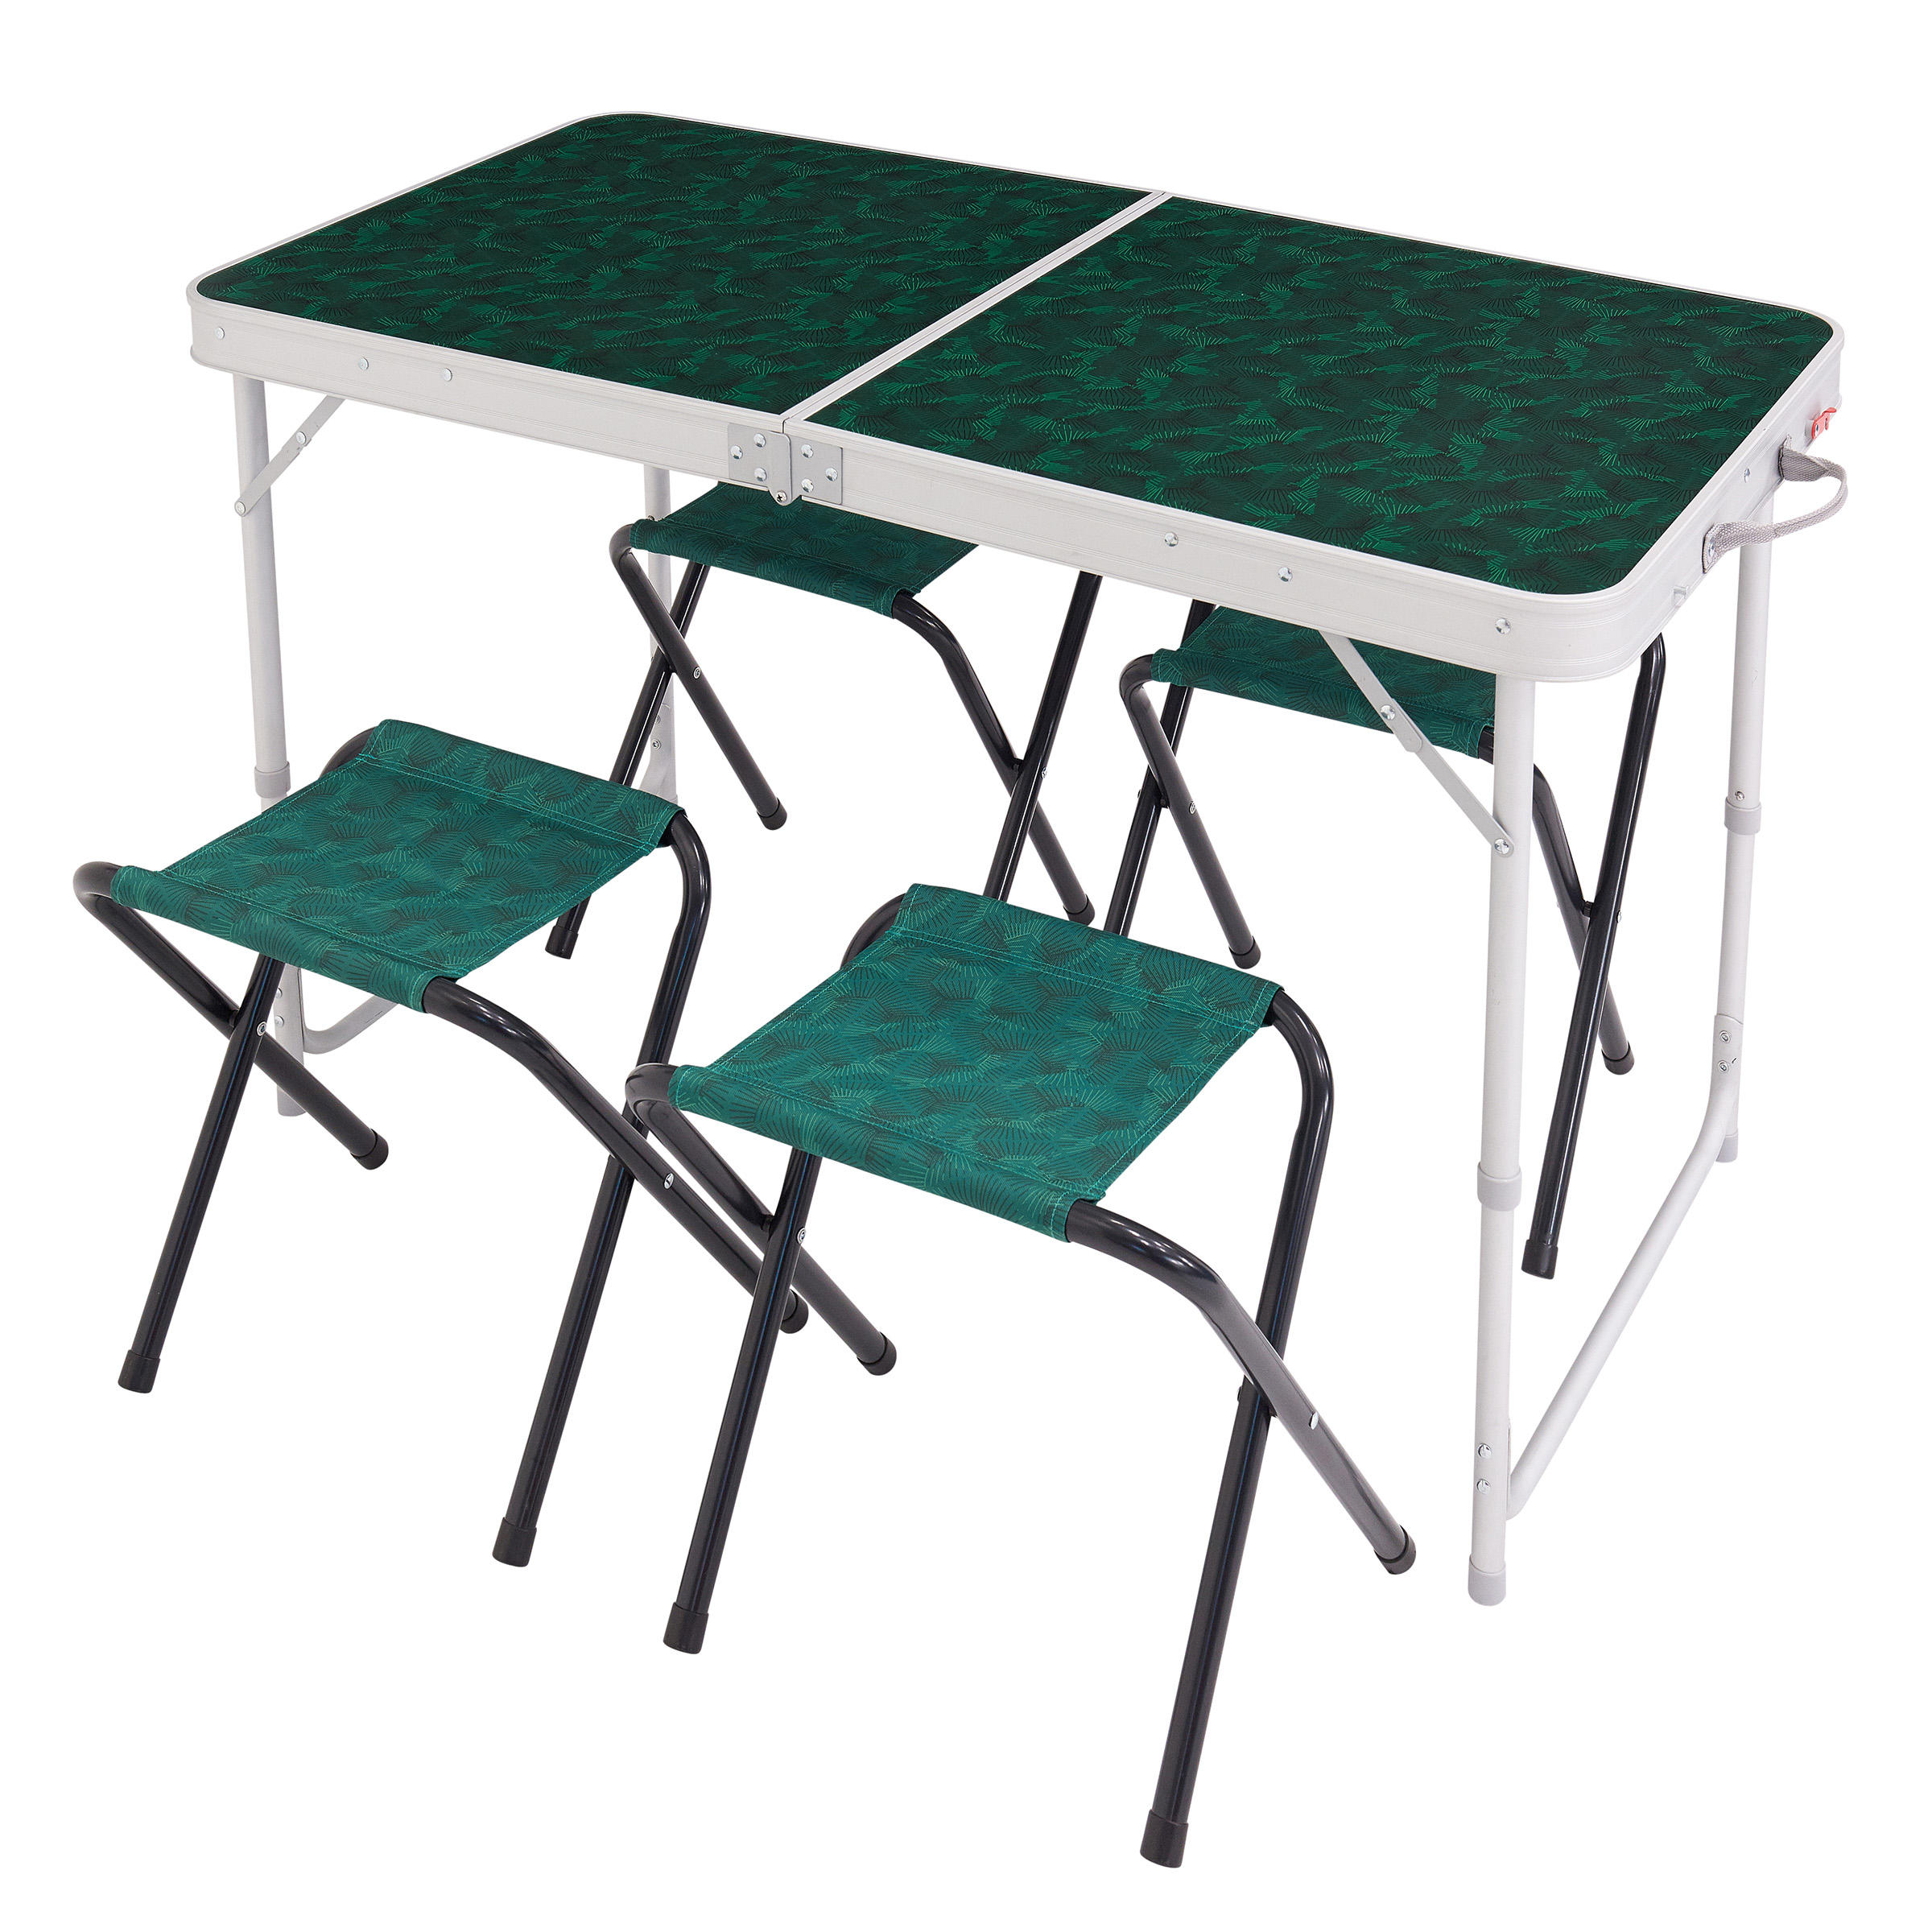 QUECHUA Camping/Hiking Table for 4 Persons with 4 Seats - Green